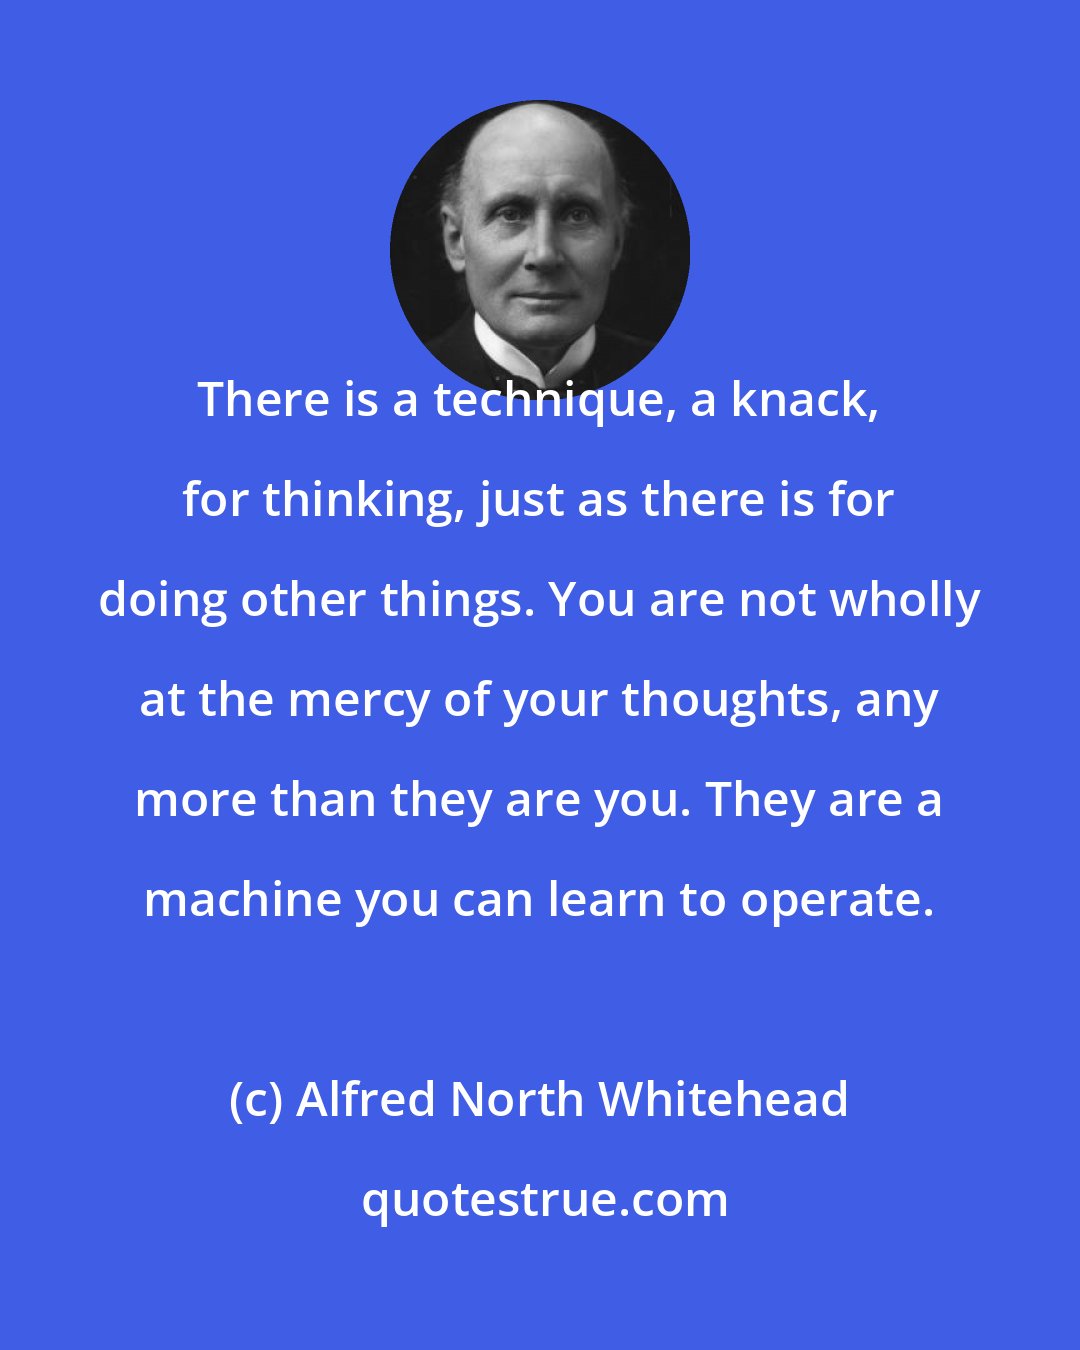 Alfred North Whitehead: There is a technique, a knack, for thinking, just as there is for doing other things. You are not wholly at the mercy of your thoughts, any more than they are you. They are a machine you can learn to operate.